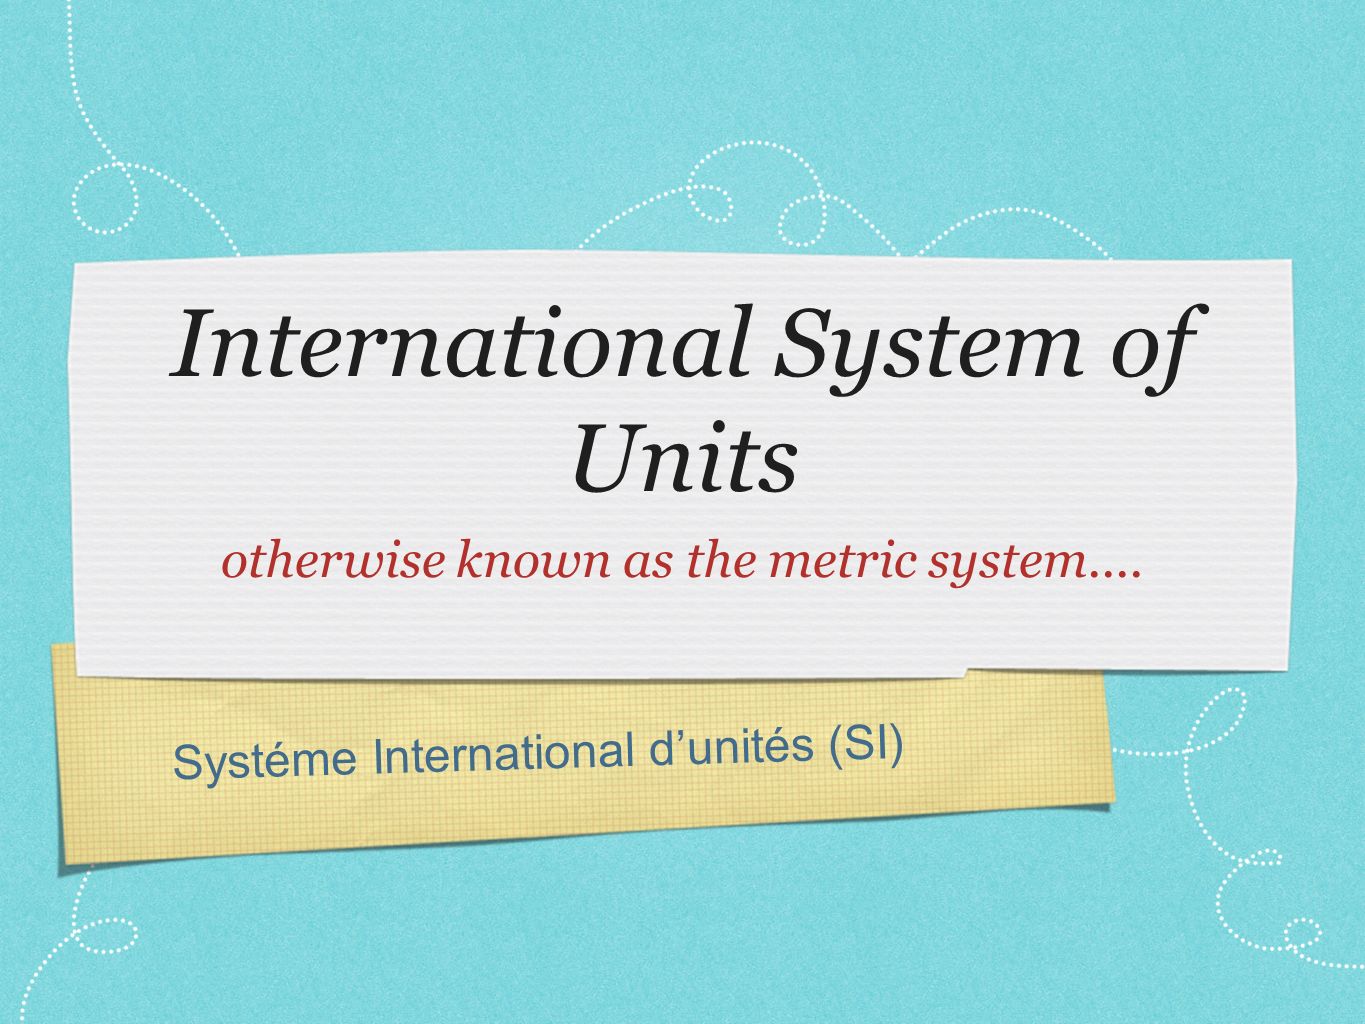 Systéme International d’unités (SI) International System of Units otherwise known as the metric system....